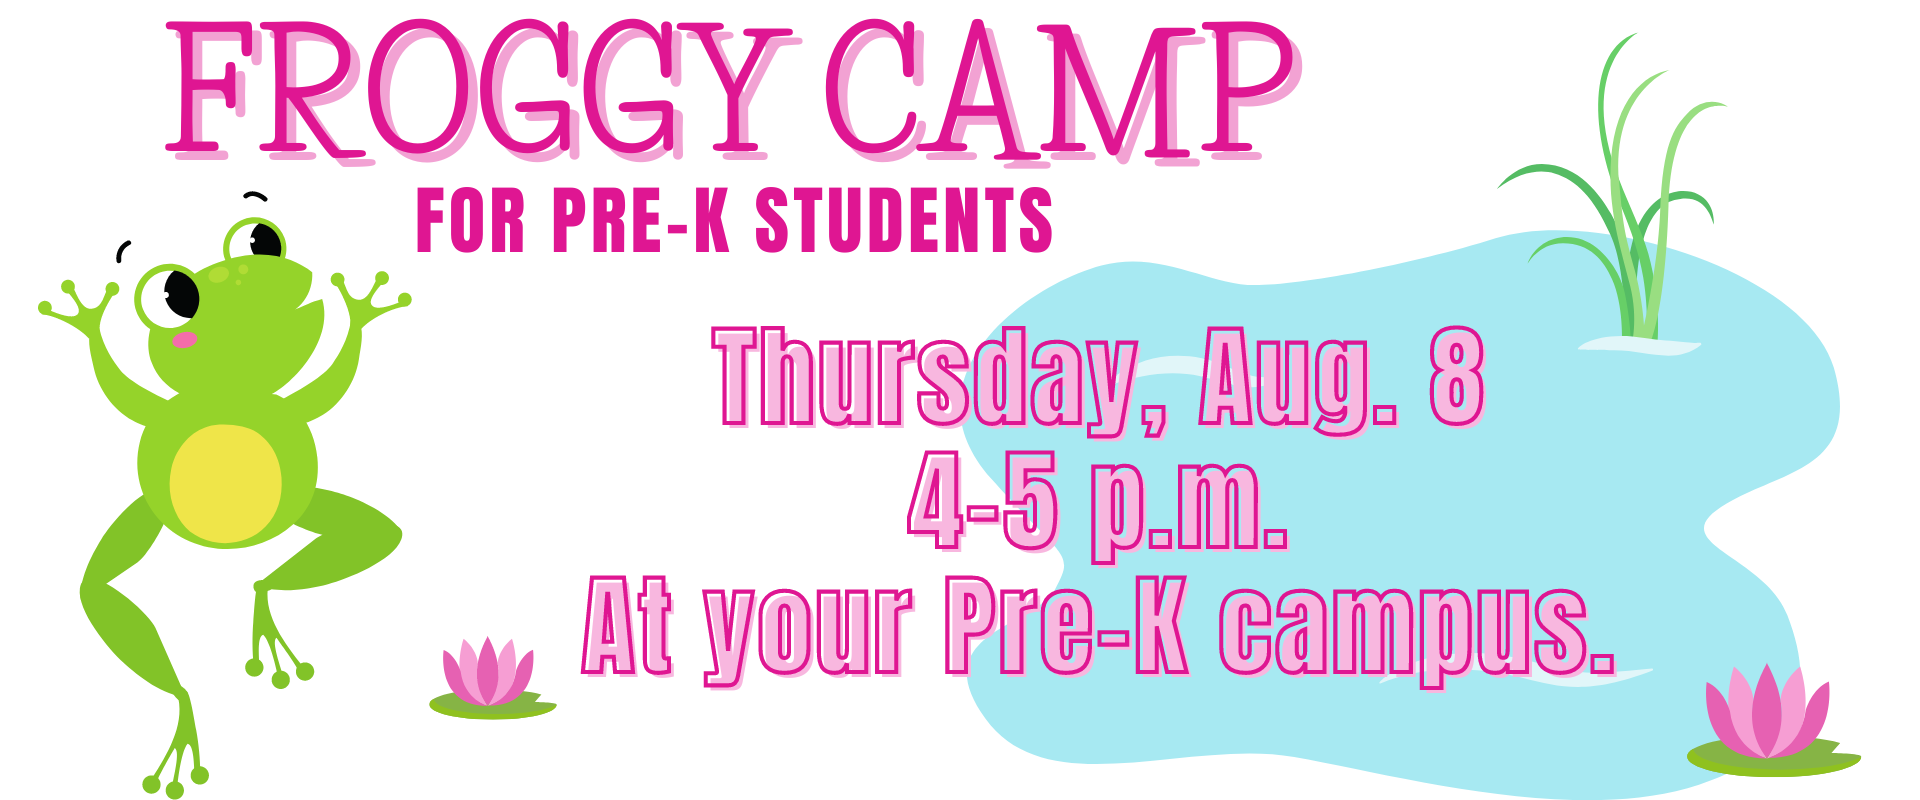 Froggy Camp for Pre-k